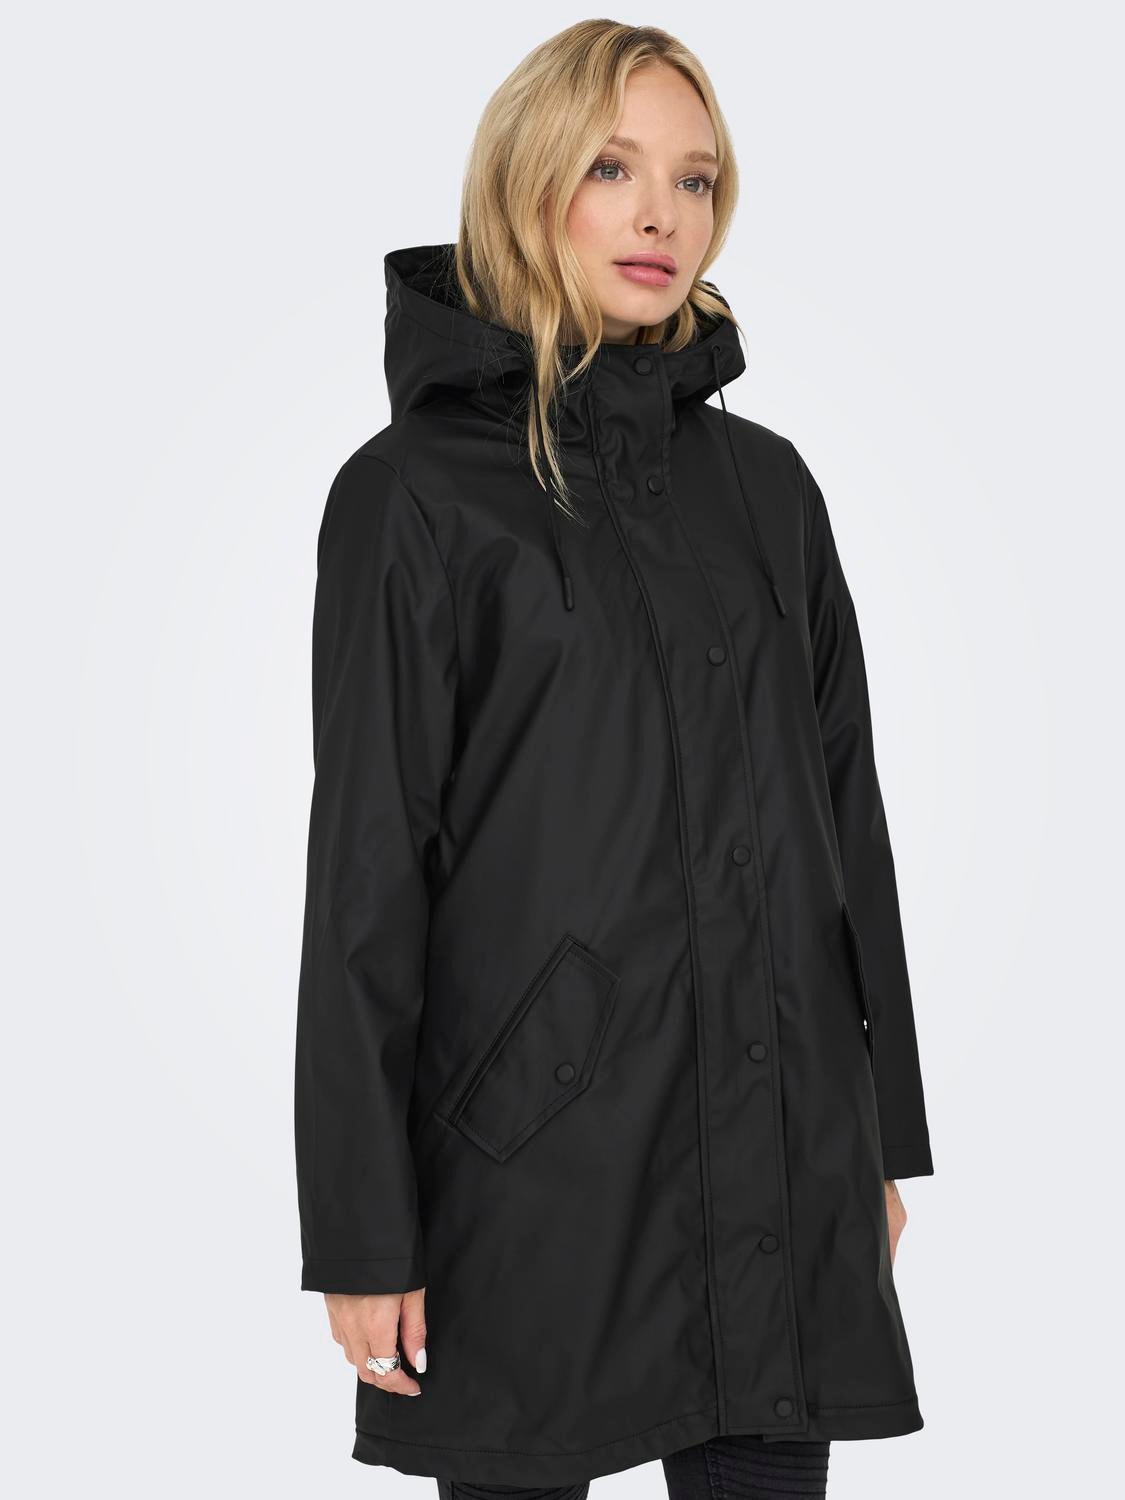 ONLY Rain jacket with teddy lining -Black - 15206116